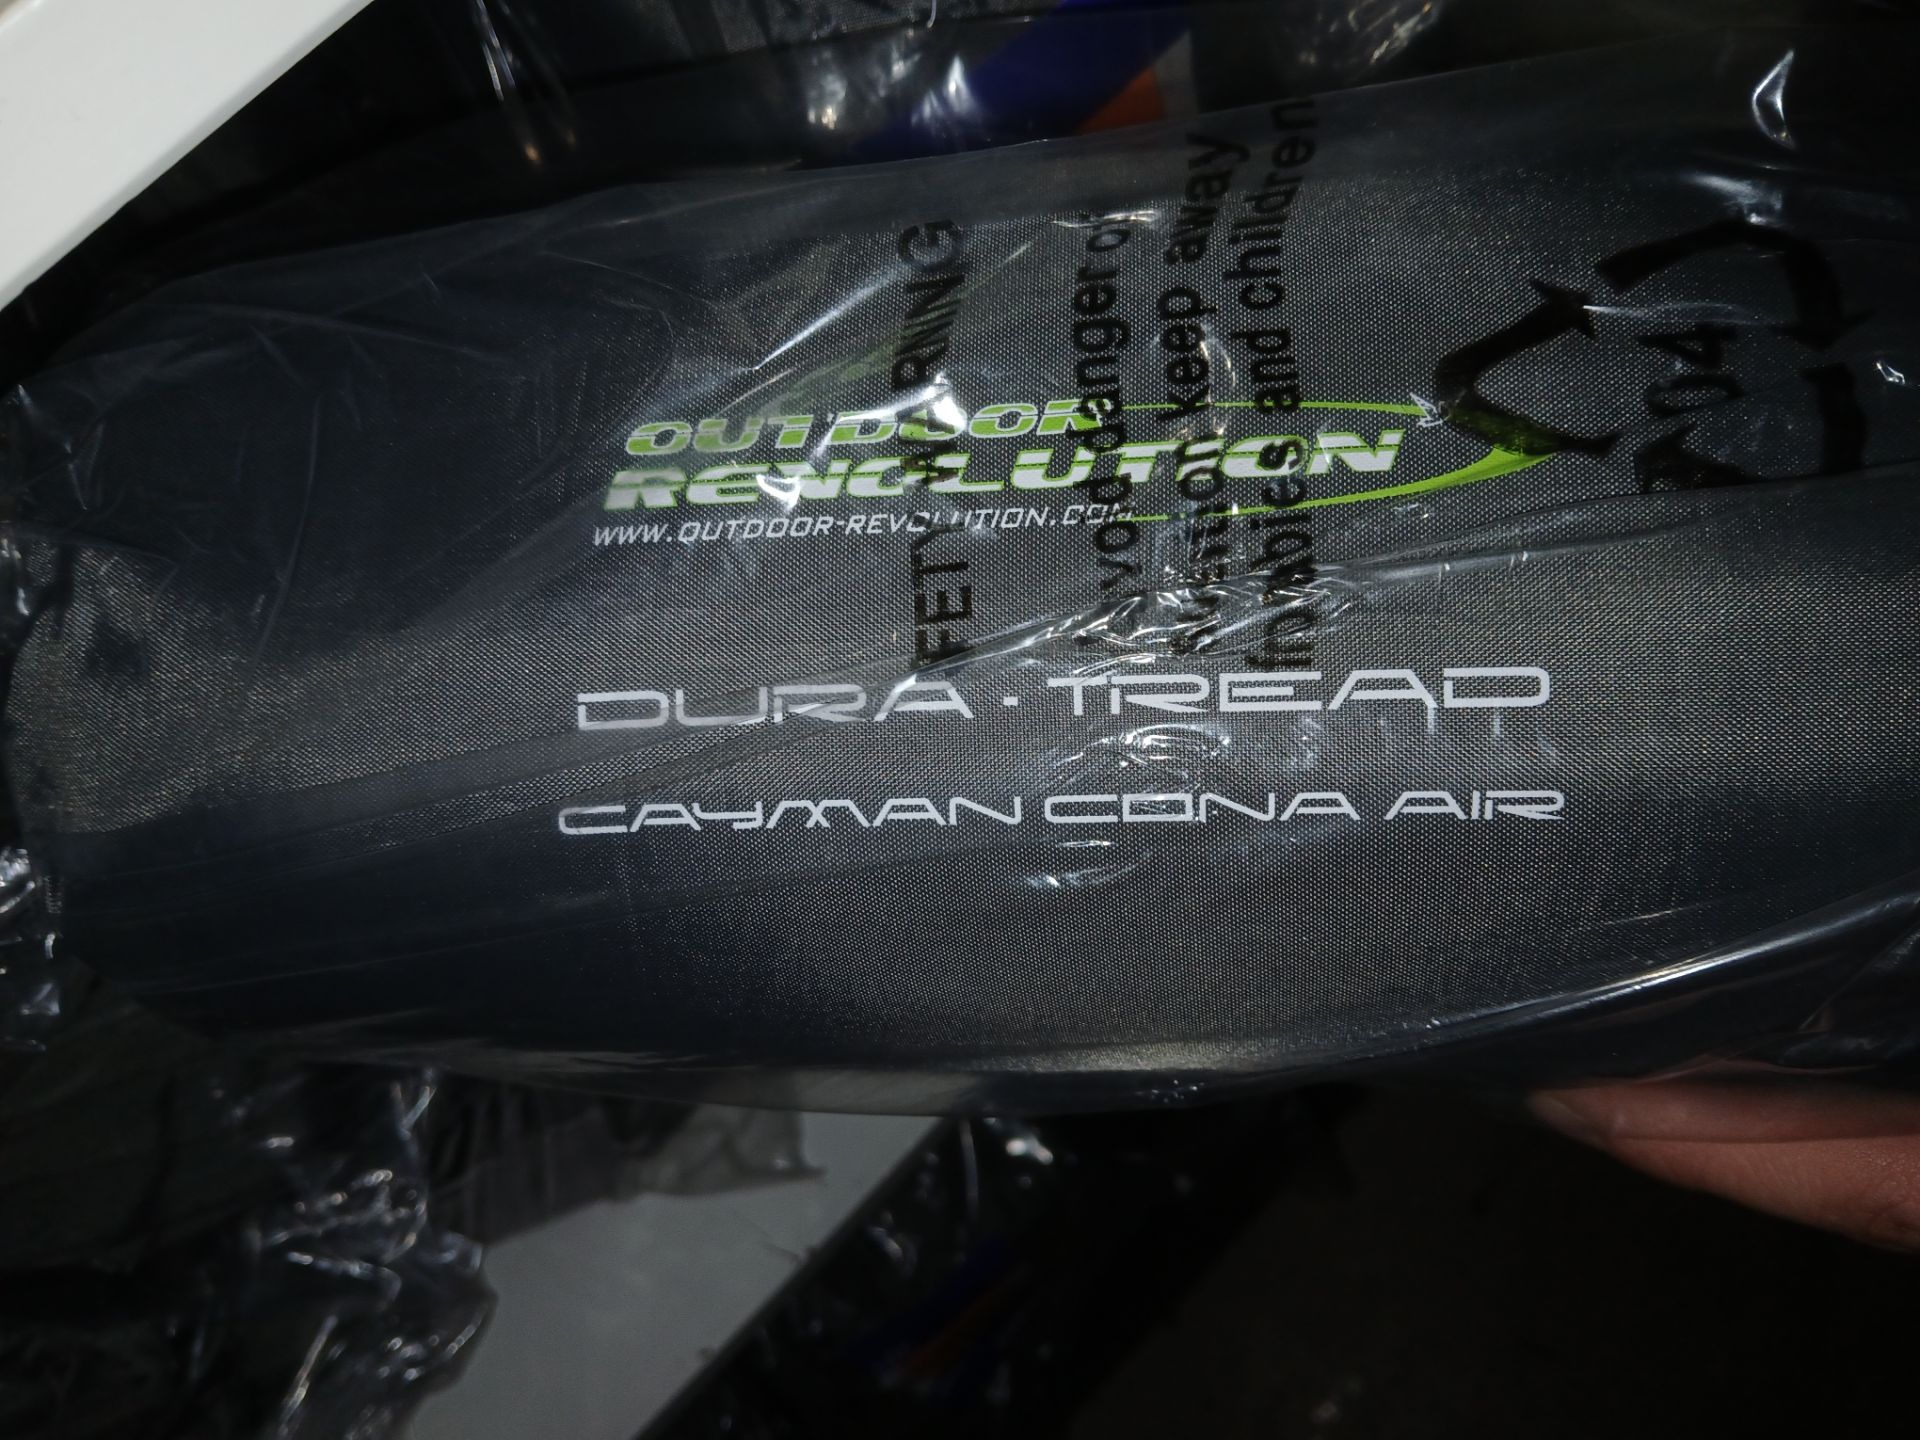 14 x Outdoor Revolution Dura Trad for Cayman Cona Air (Please note, Viewing Strongly Recommended - - Image 2 of 2